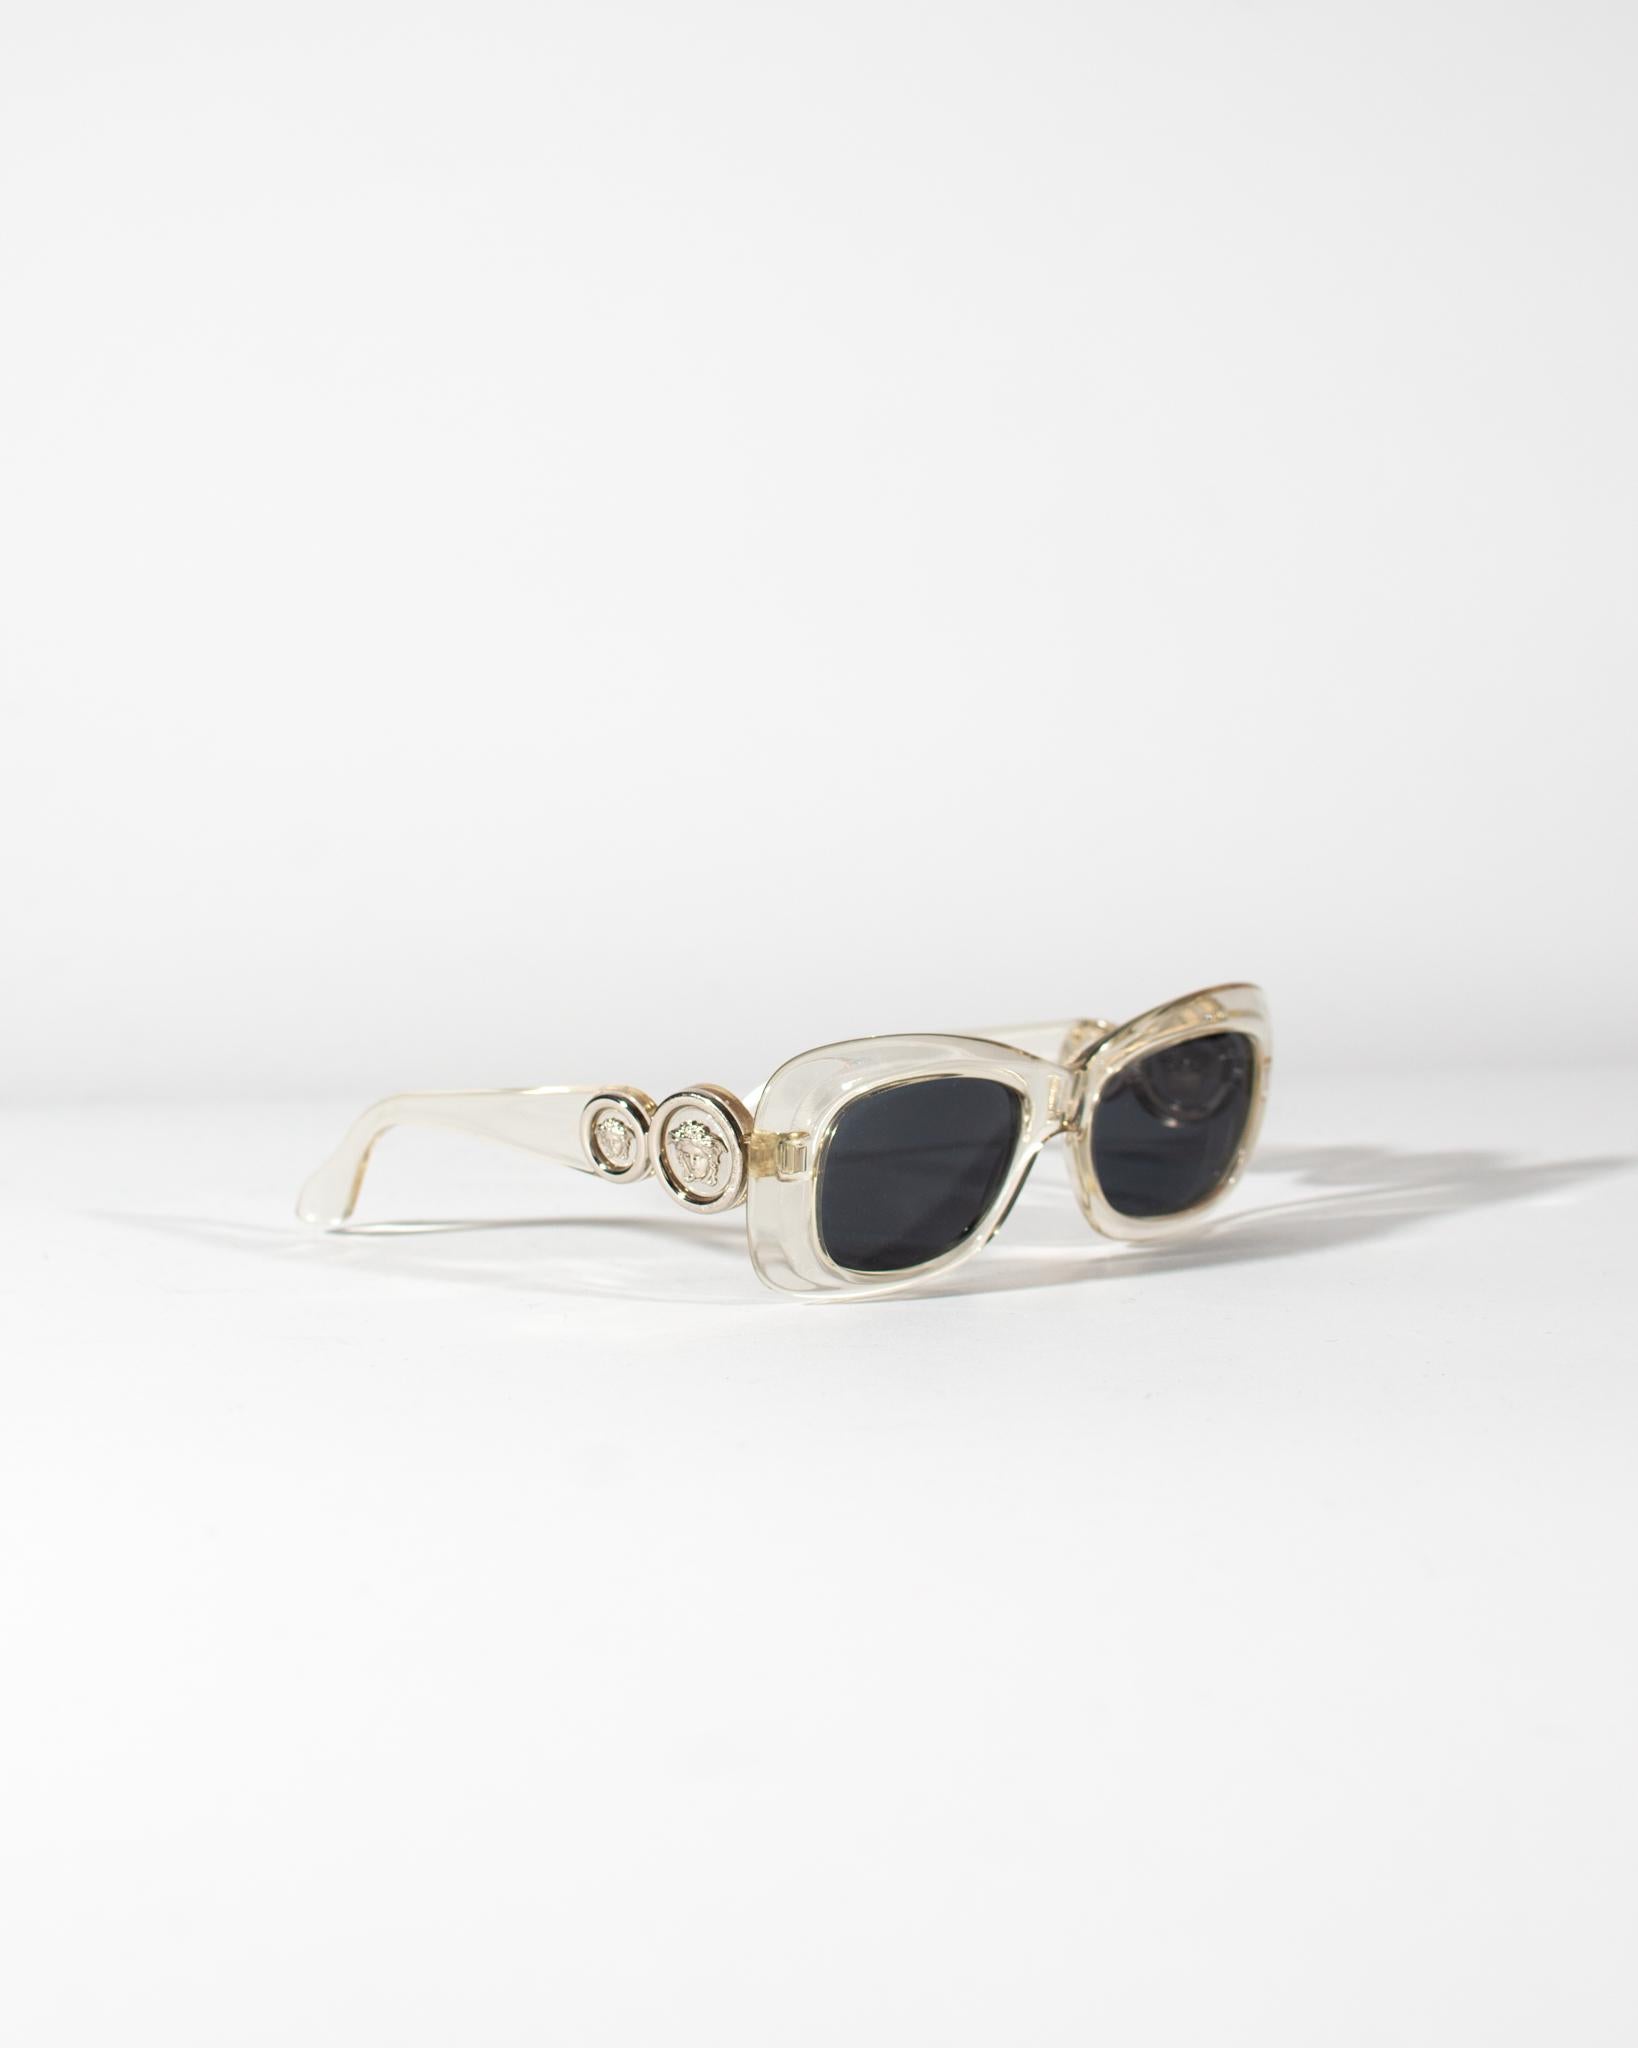 Presenting These translucent, vintage Gianni Versace glasses have an oval shape with a slight tilt creating a cat-eye shape. The arms have two round silver Versace Medusa emblems on each side. The model is similar to the house's iconic 'Biggie'